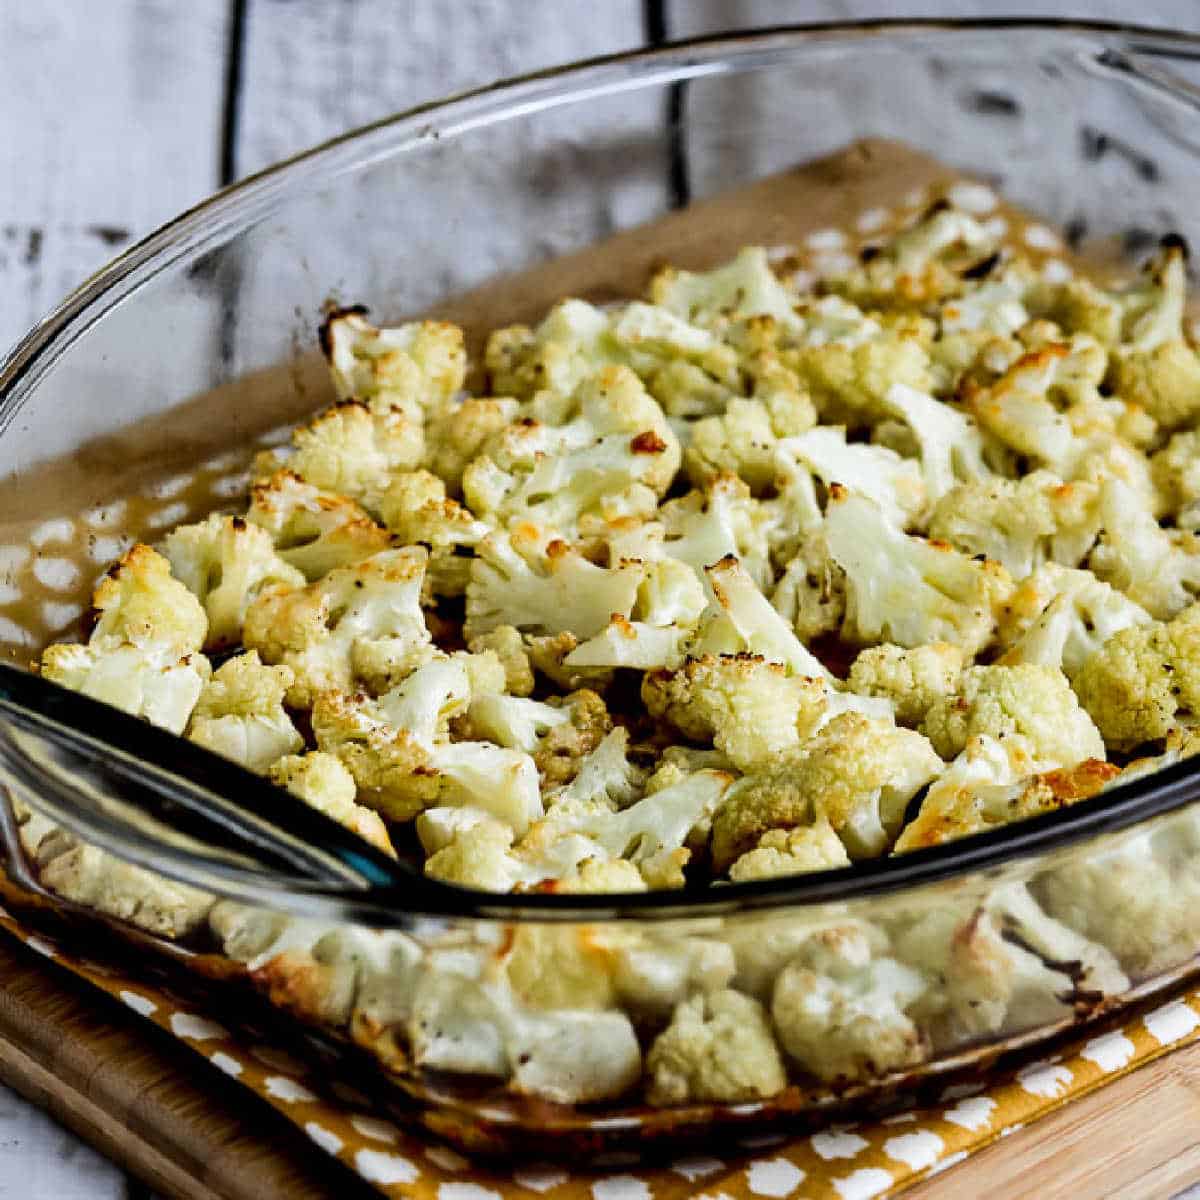 Square image of roasted cauliflower and parmesan cheese in a baking dish